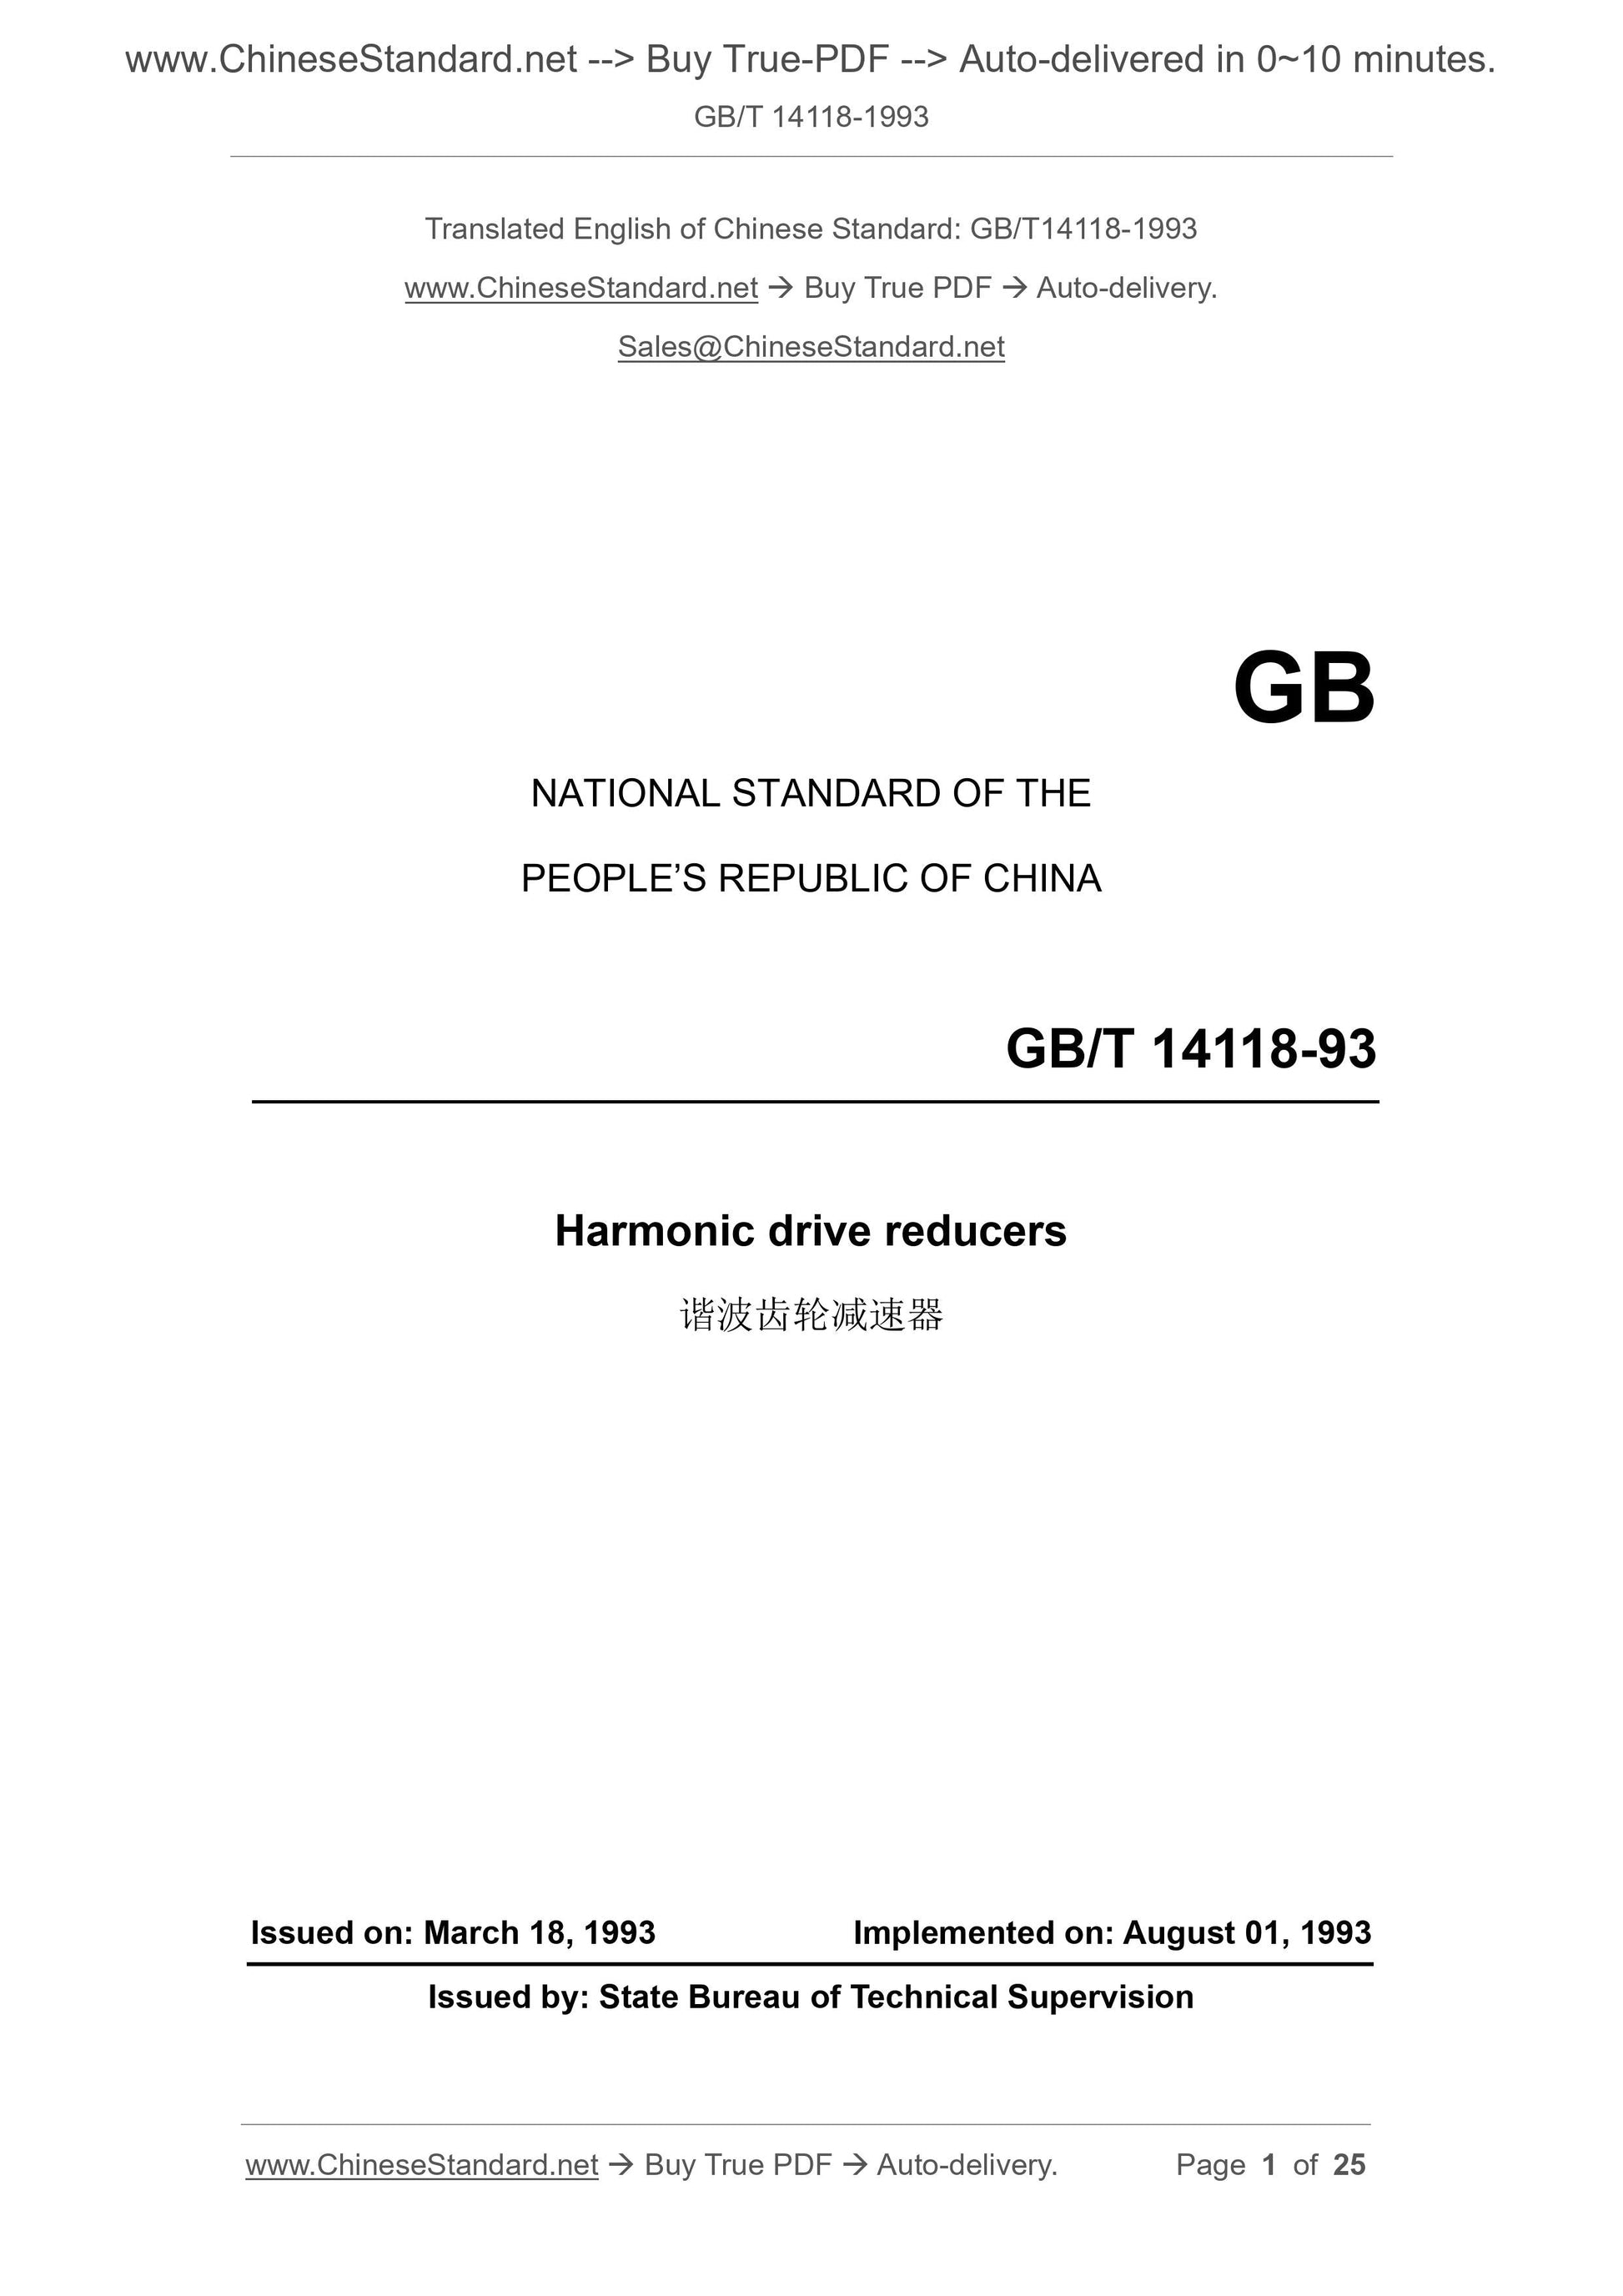 GB/T 14118-1993 Page 1